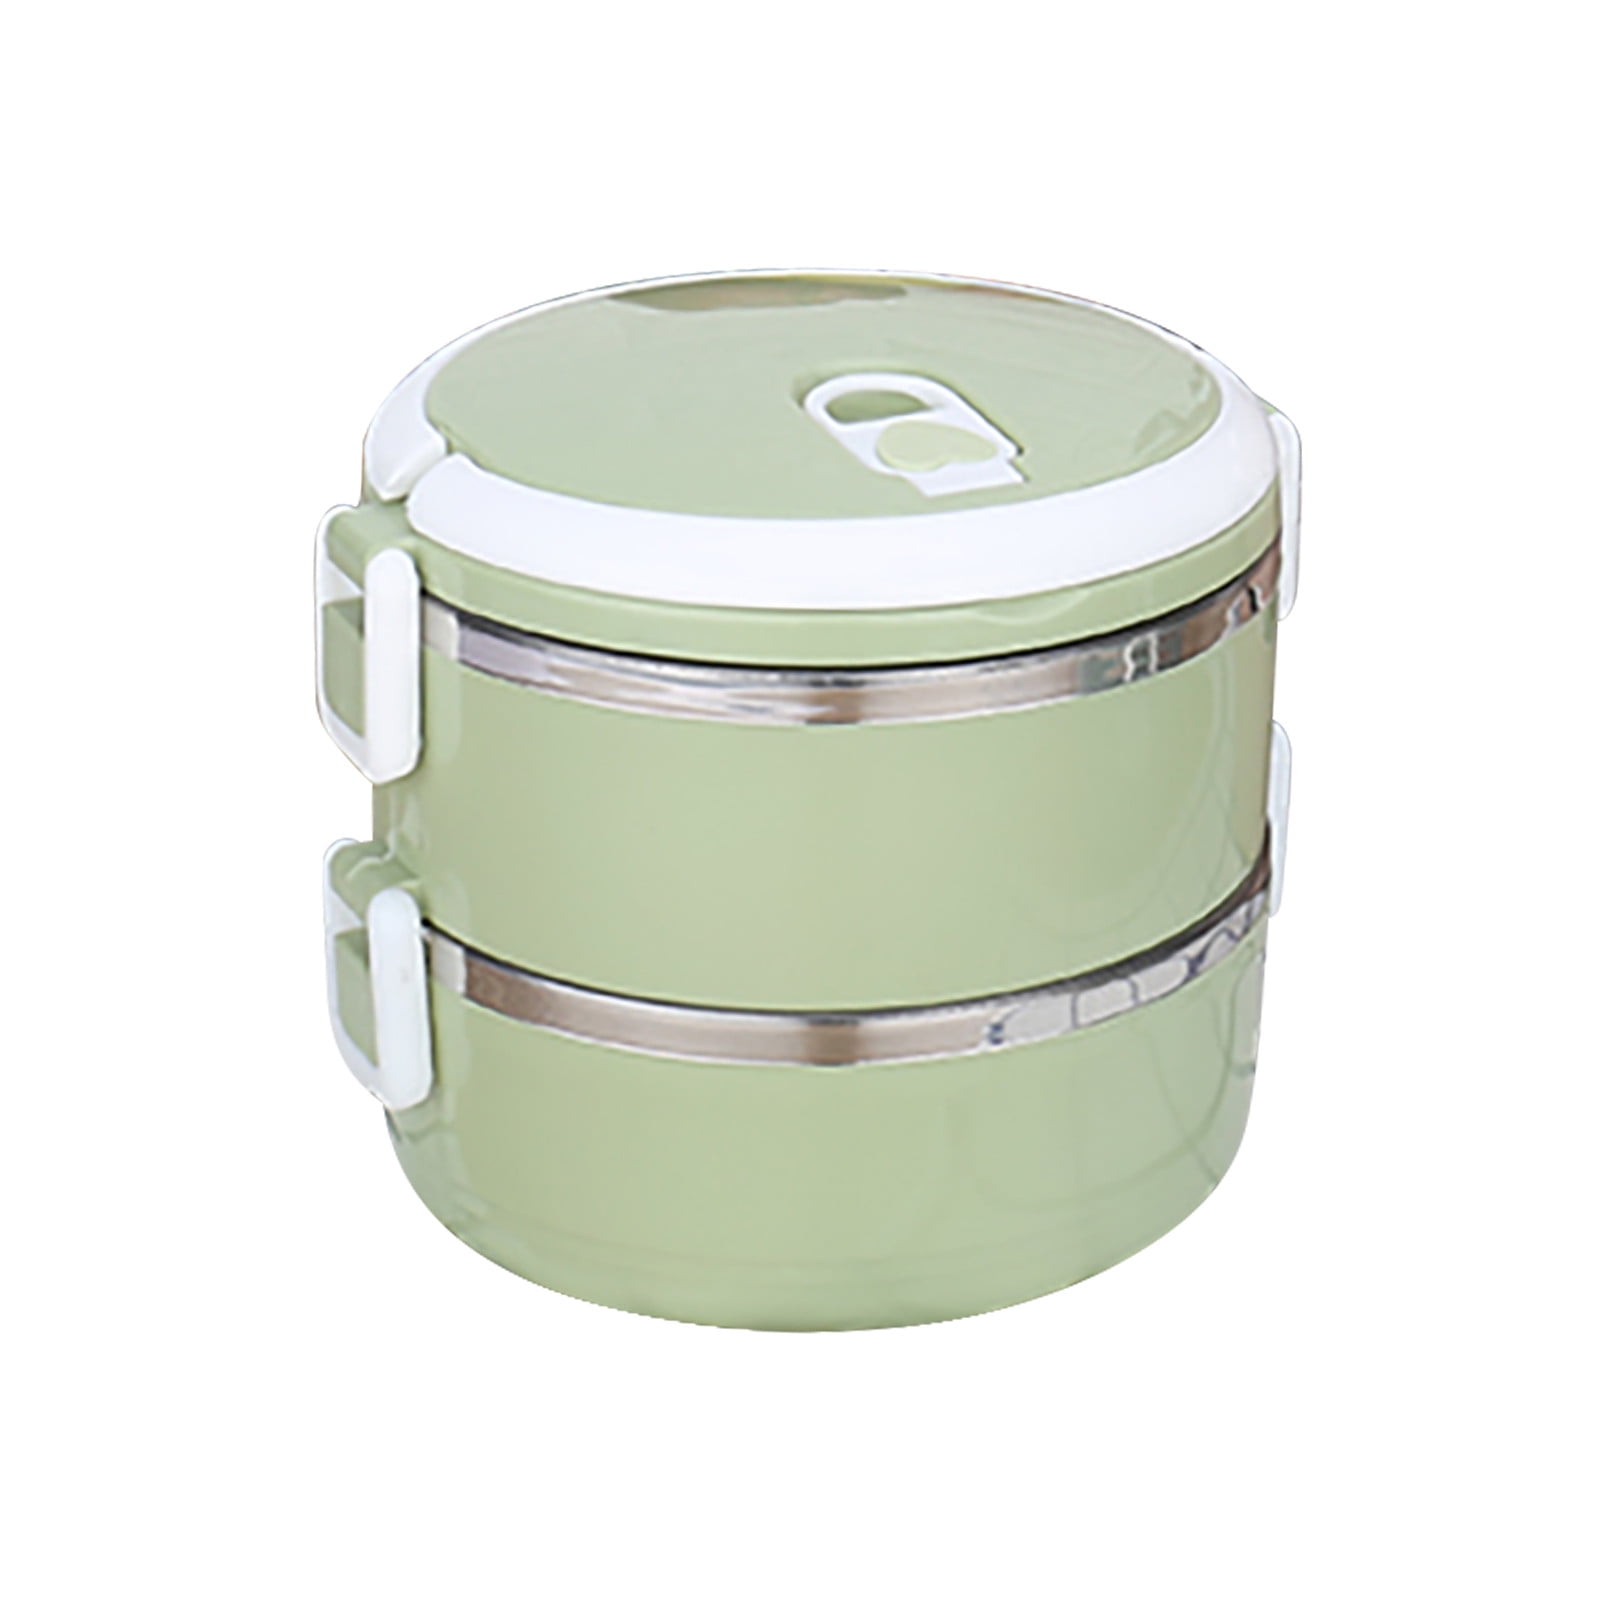 Ozeri ThermoMax Stackable Lunch Box and Double-wall Insulated Food